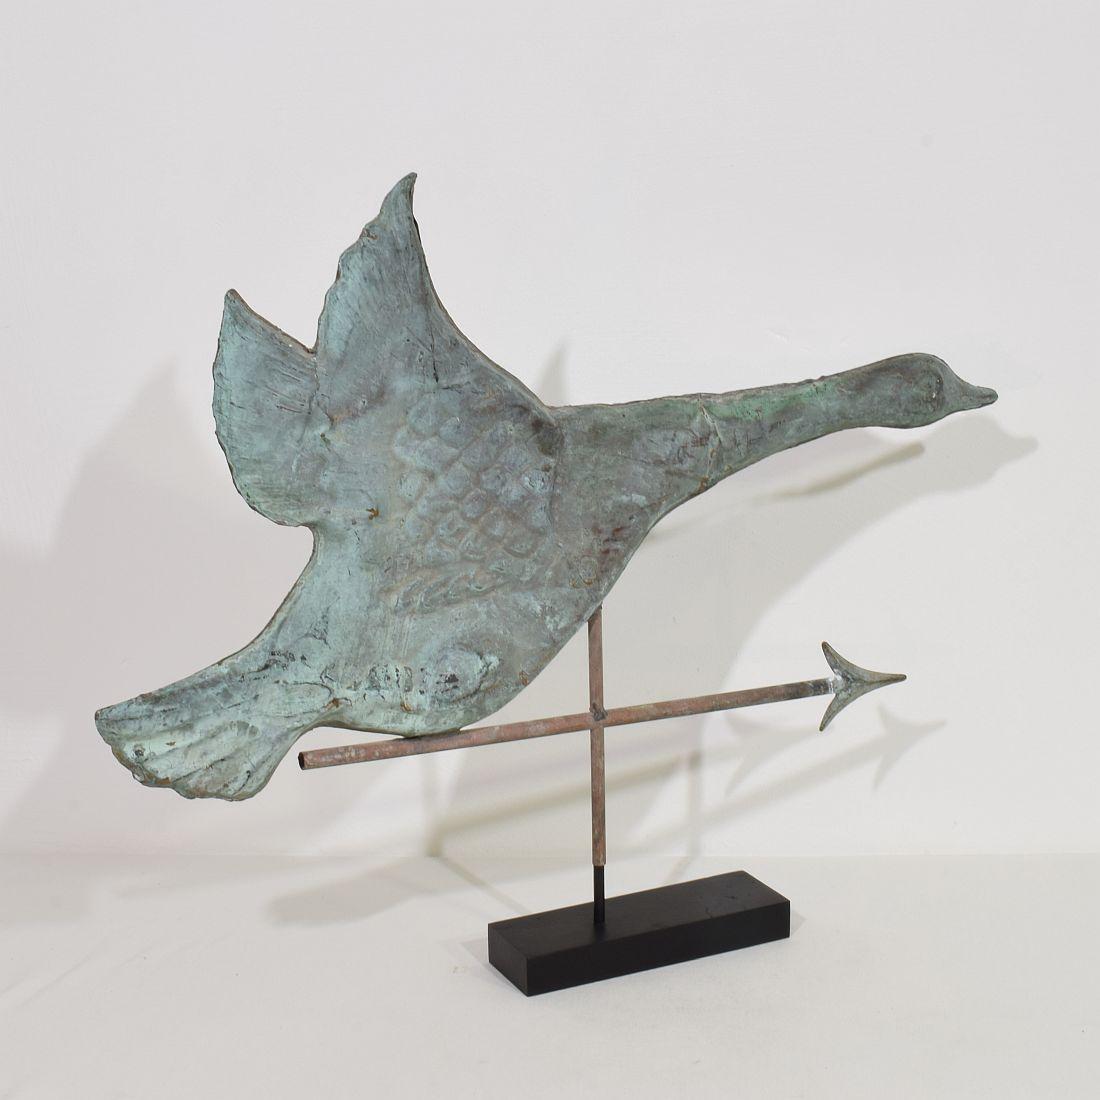 Hand-Crafted 19th Century, French Folk Art Copper Flying Goose Weathervane